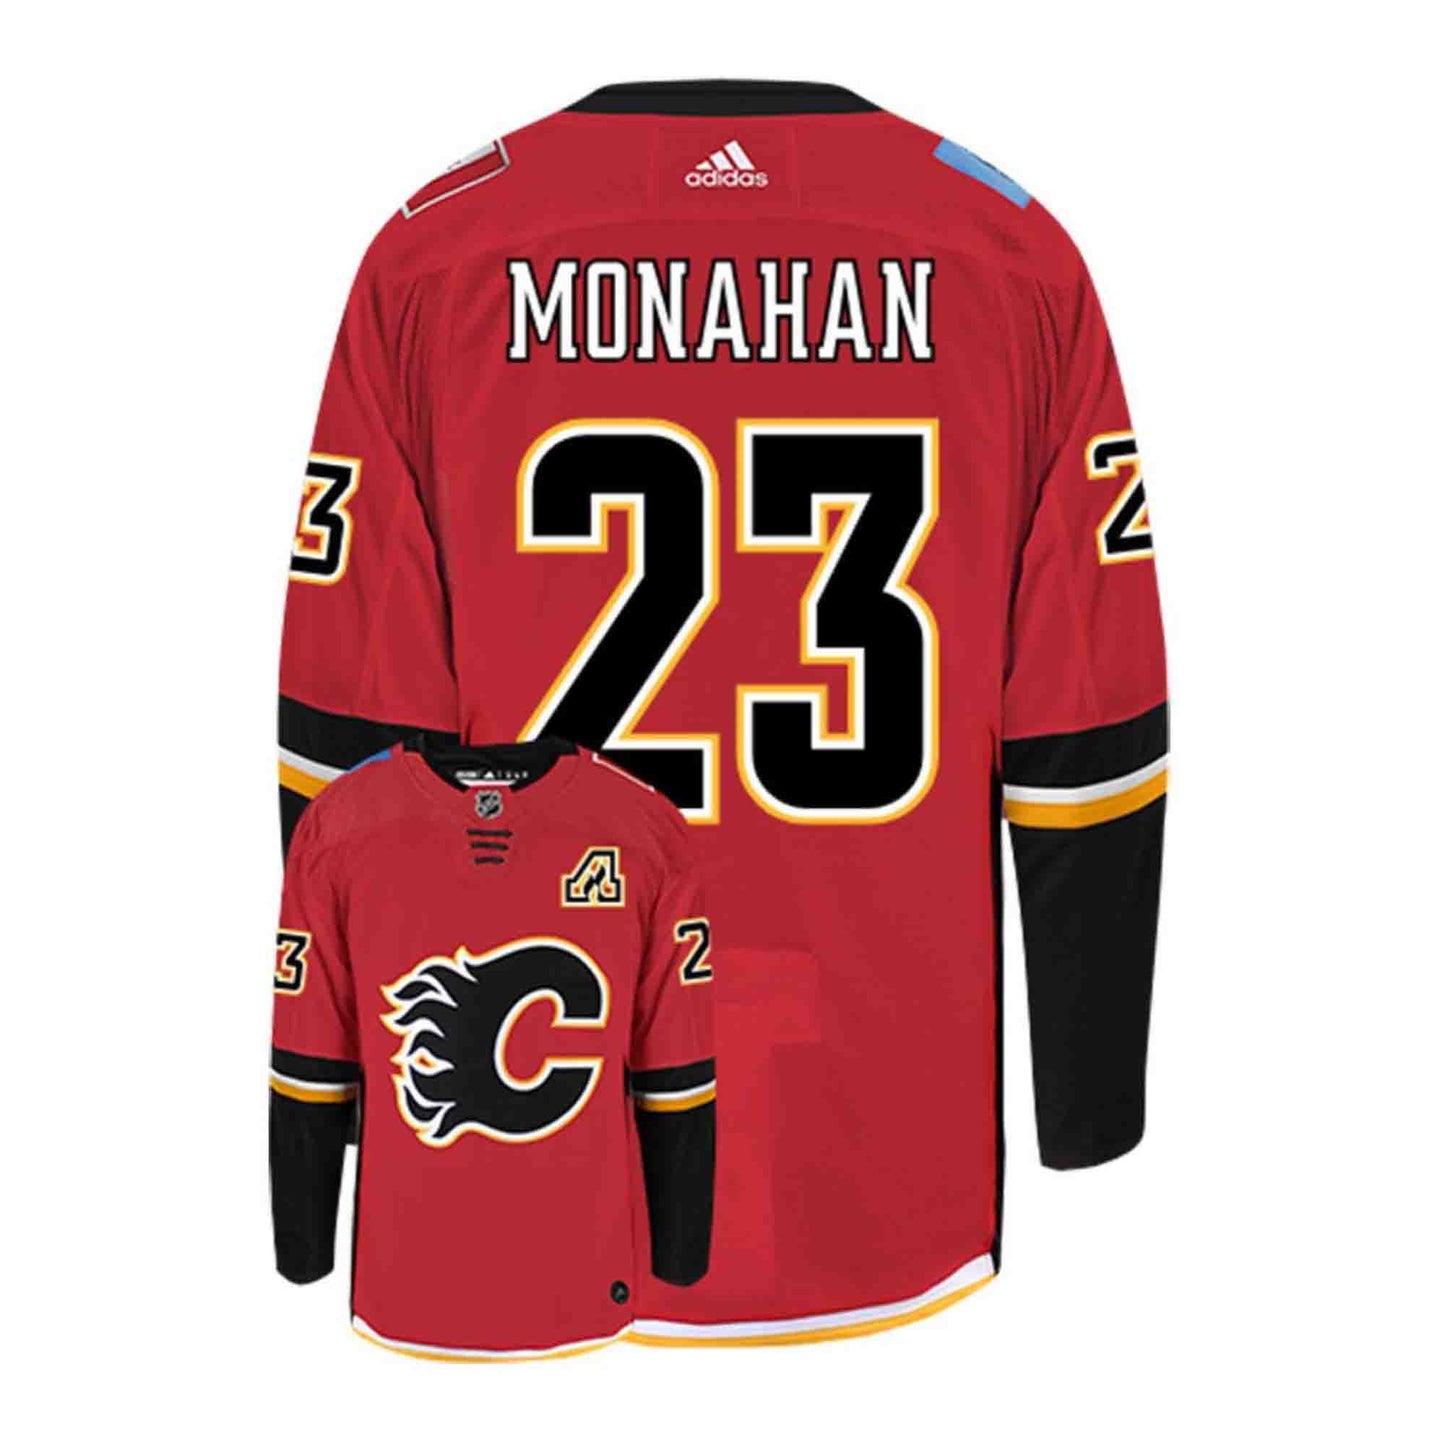 Sean Monahan Calgary Flames Autographed adidas #23 Authentic Jersey